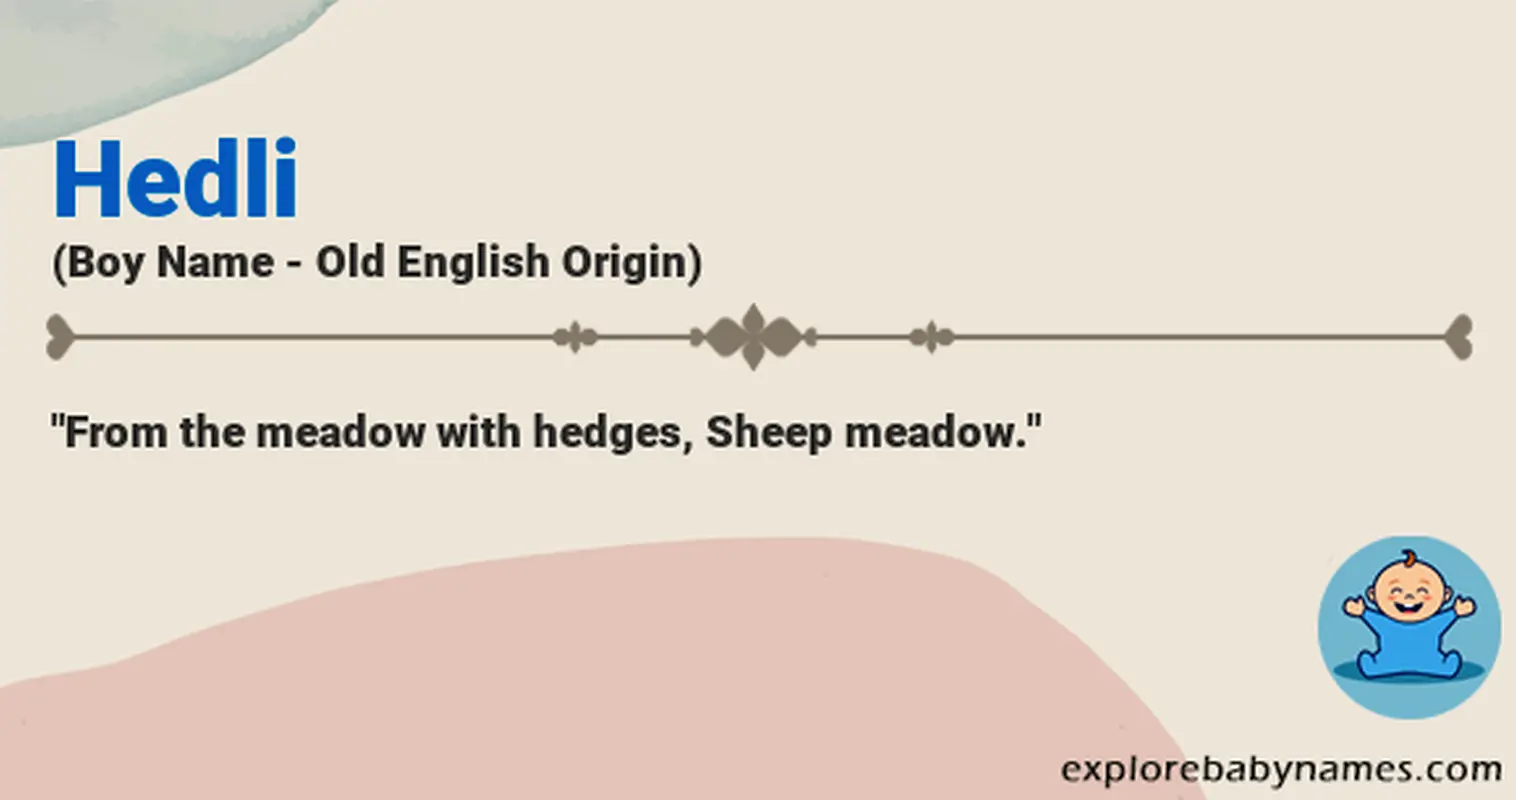 Meaning of Hedli